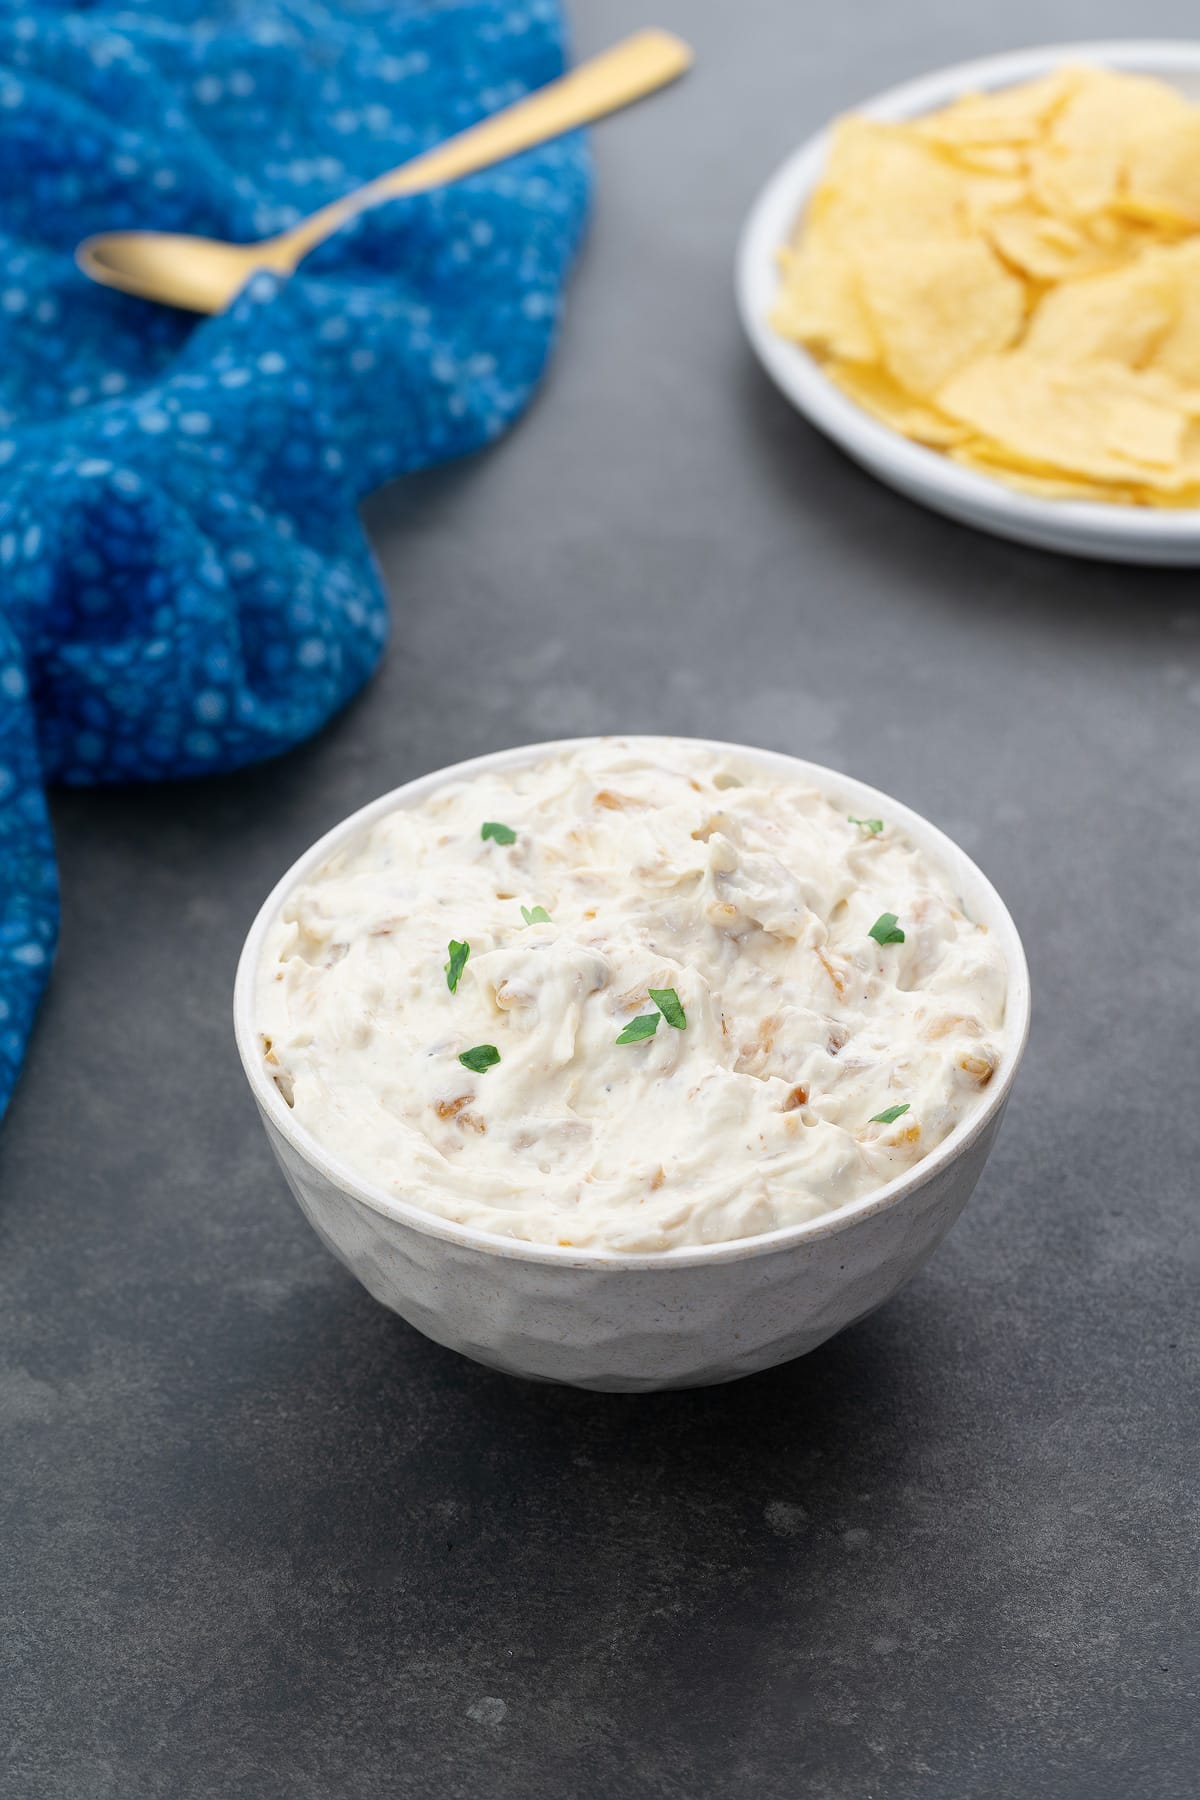 Homemade French onion dip served in a white bowl on a gray table, accompanied by chips, a golden fork, and a blue towel arranged nearby.